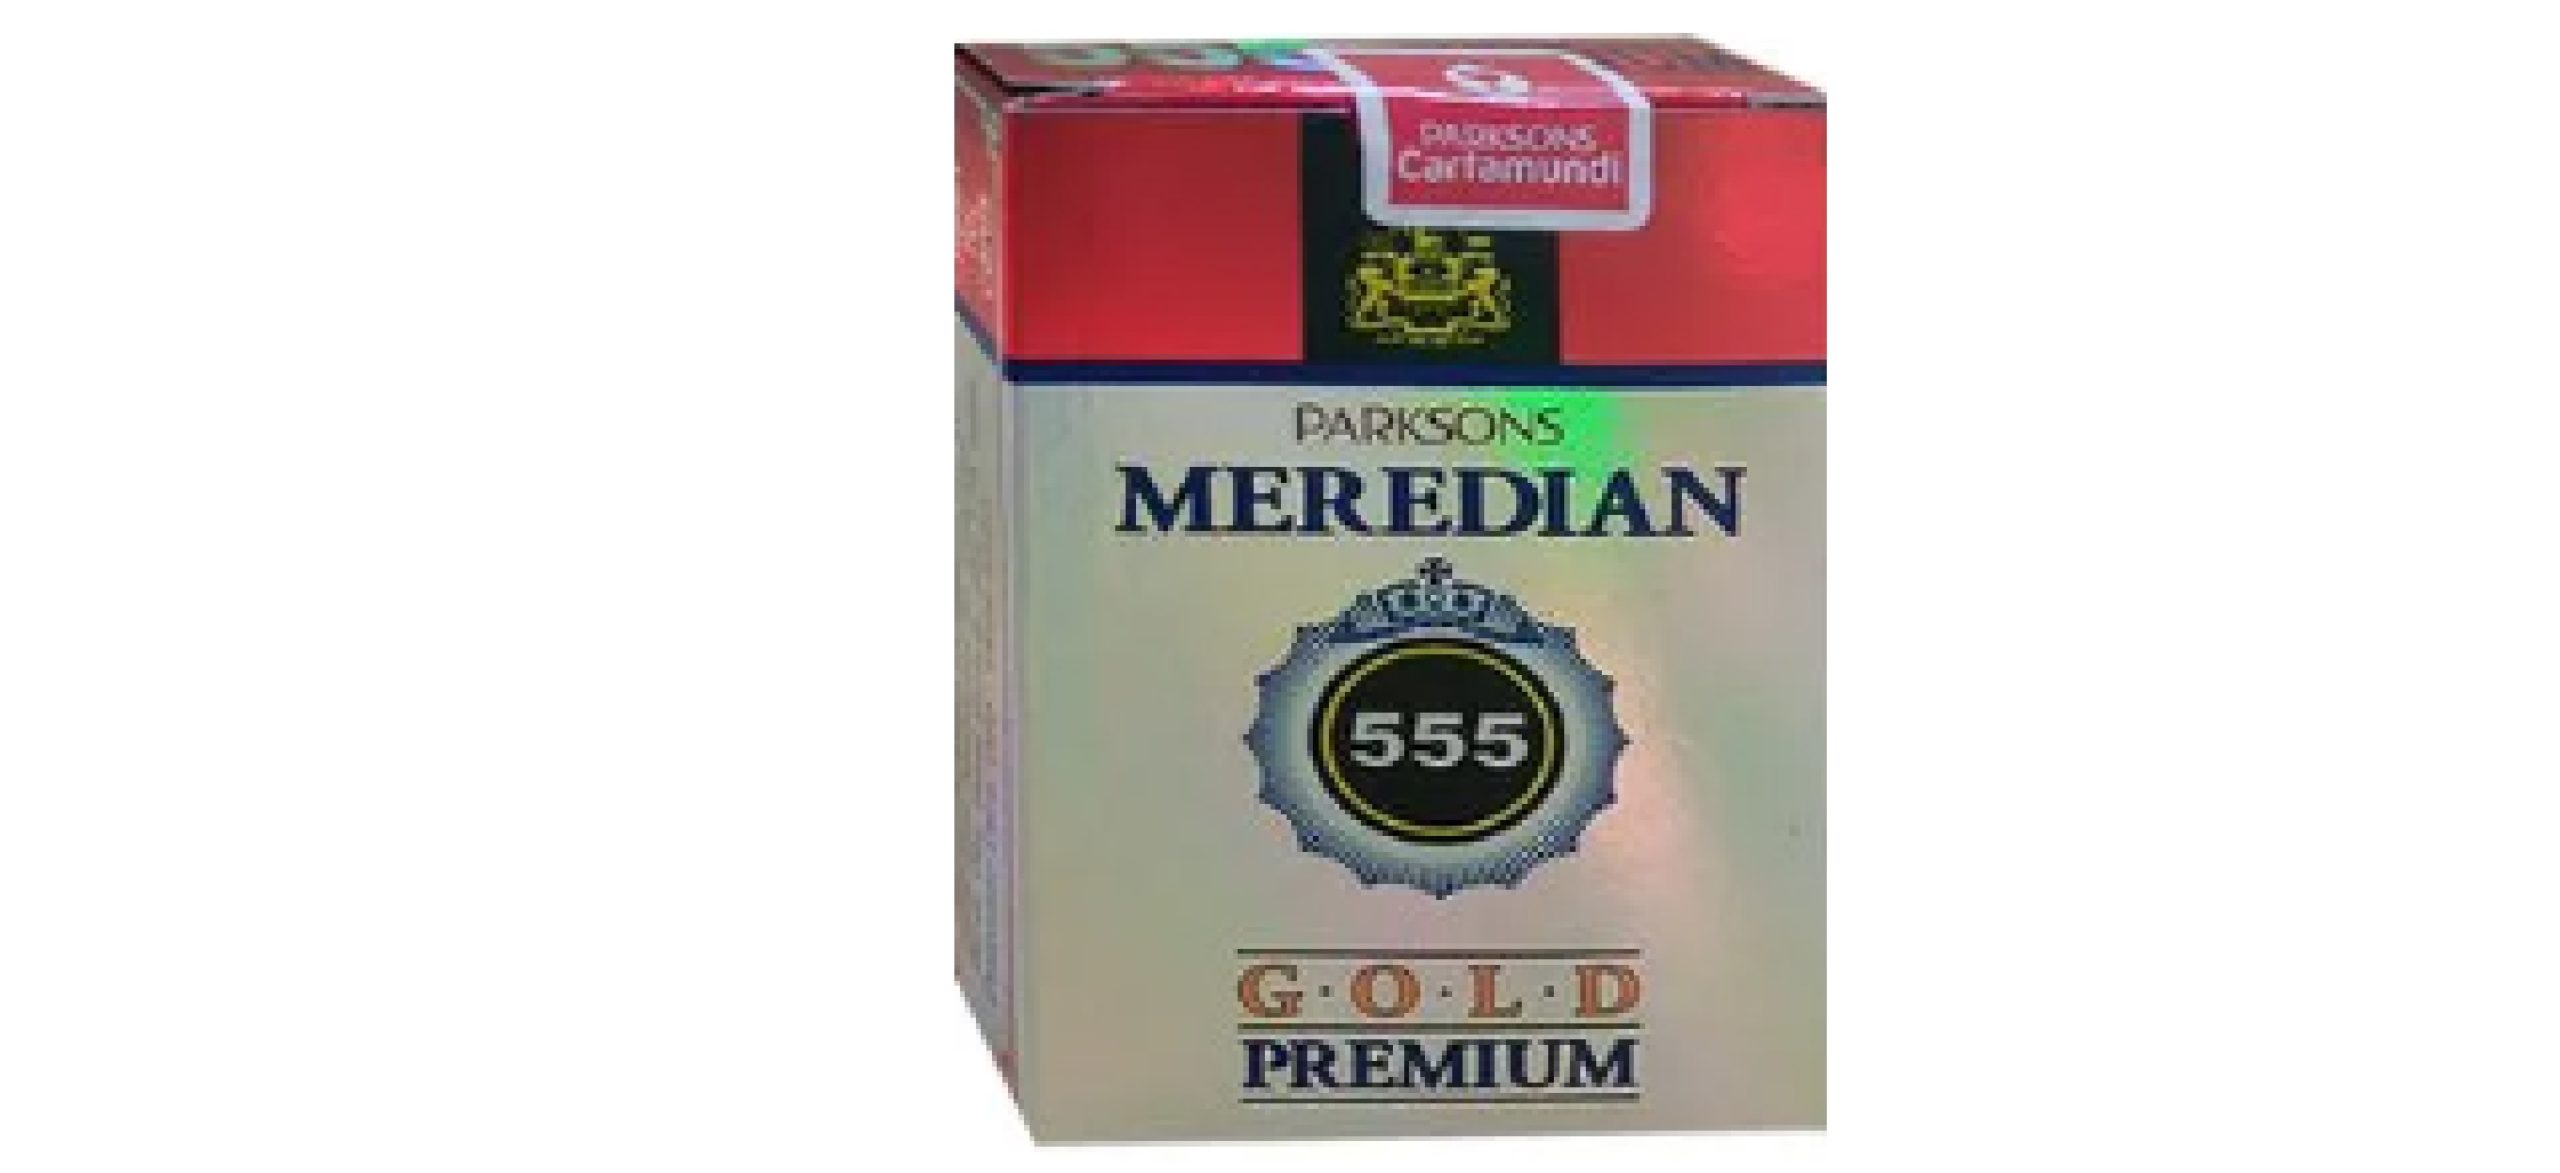 Meredian 555 gold premium  playing cards 1pkt